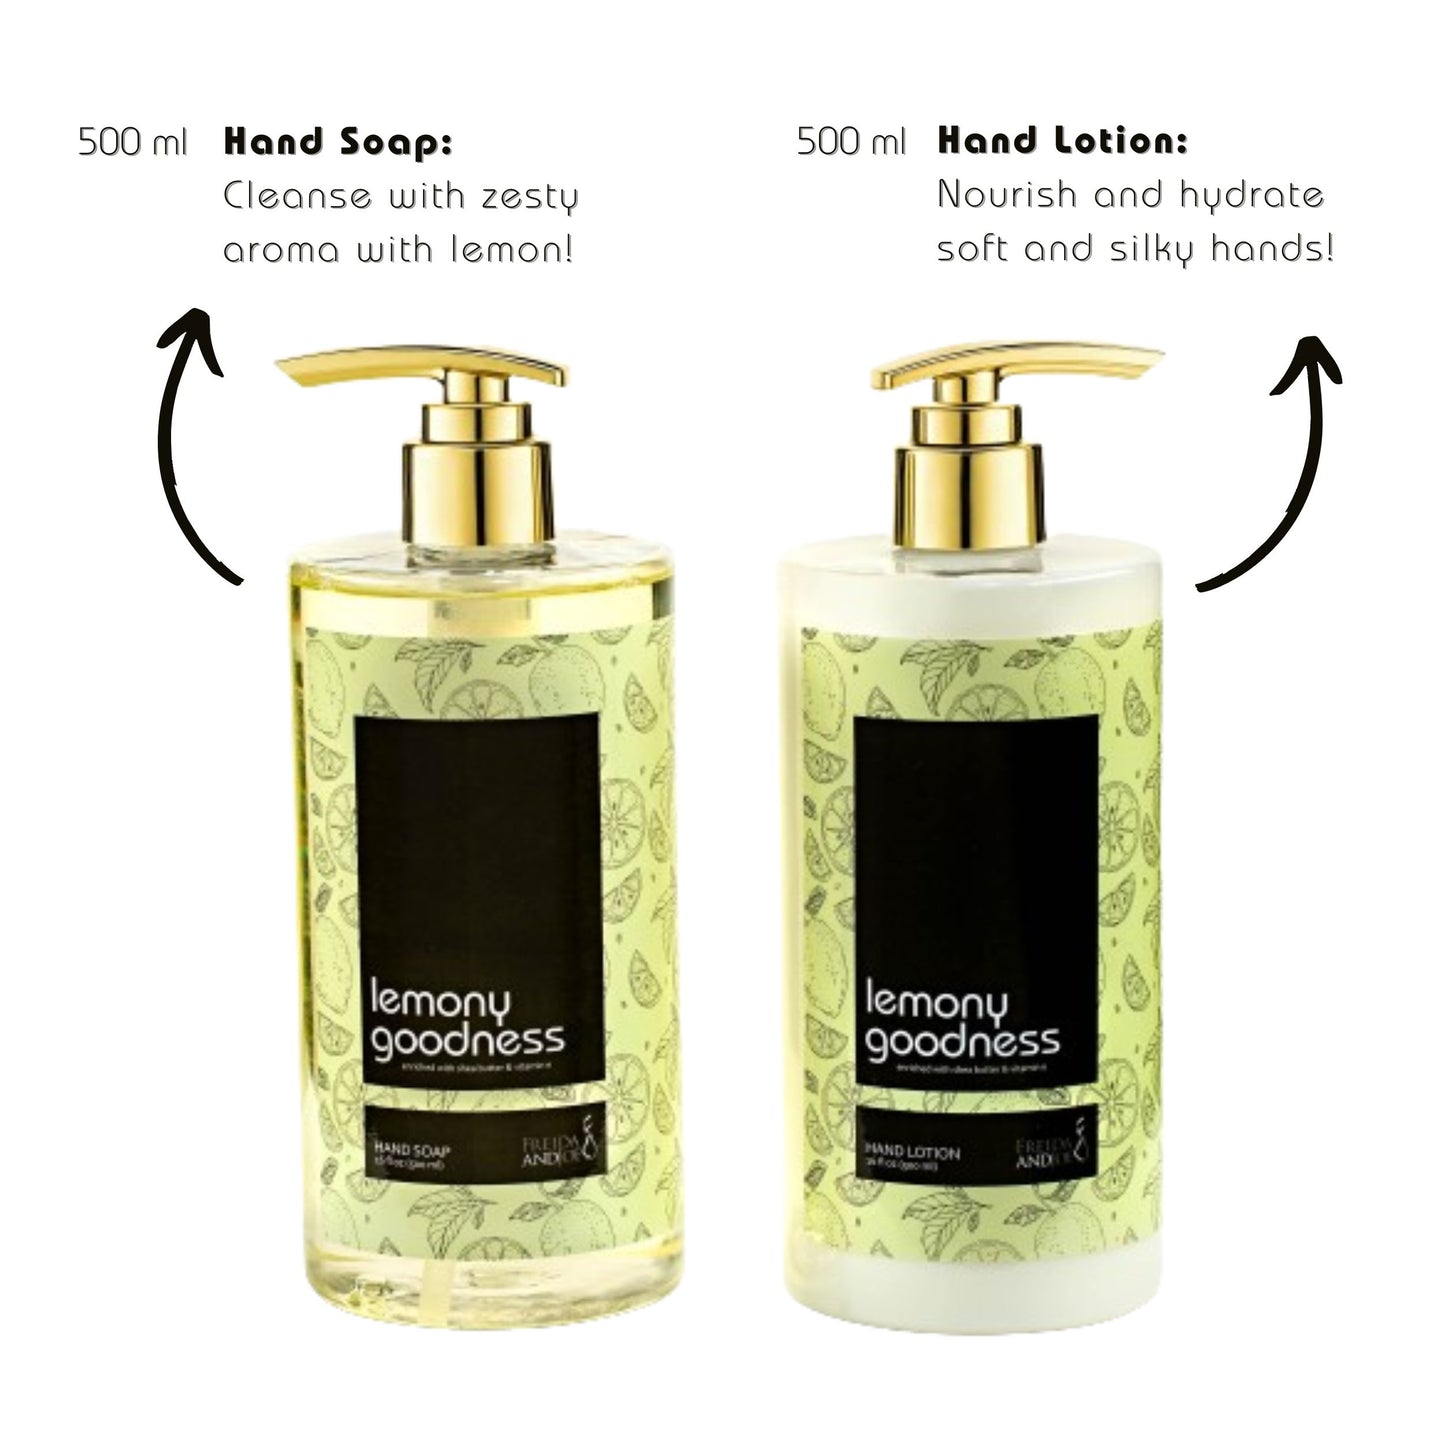 16 fl oz Lemon Citrus Aromatic and Nourishing Hand Soap and 16 fl oz Lotion Set - Keep Your Skin Incredibly Soft and Clean with Amazing Scent - Beautifully Presented in a Wooden Holder Unisex Formula